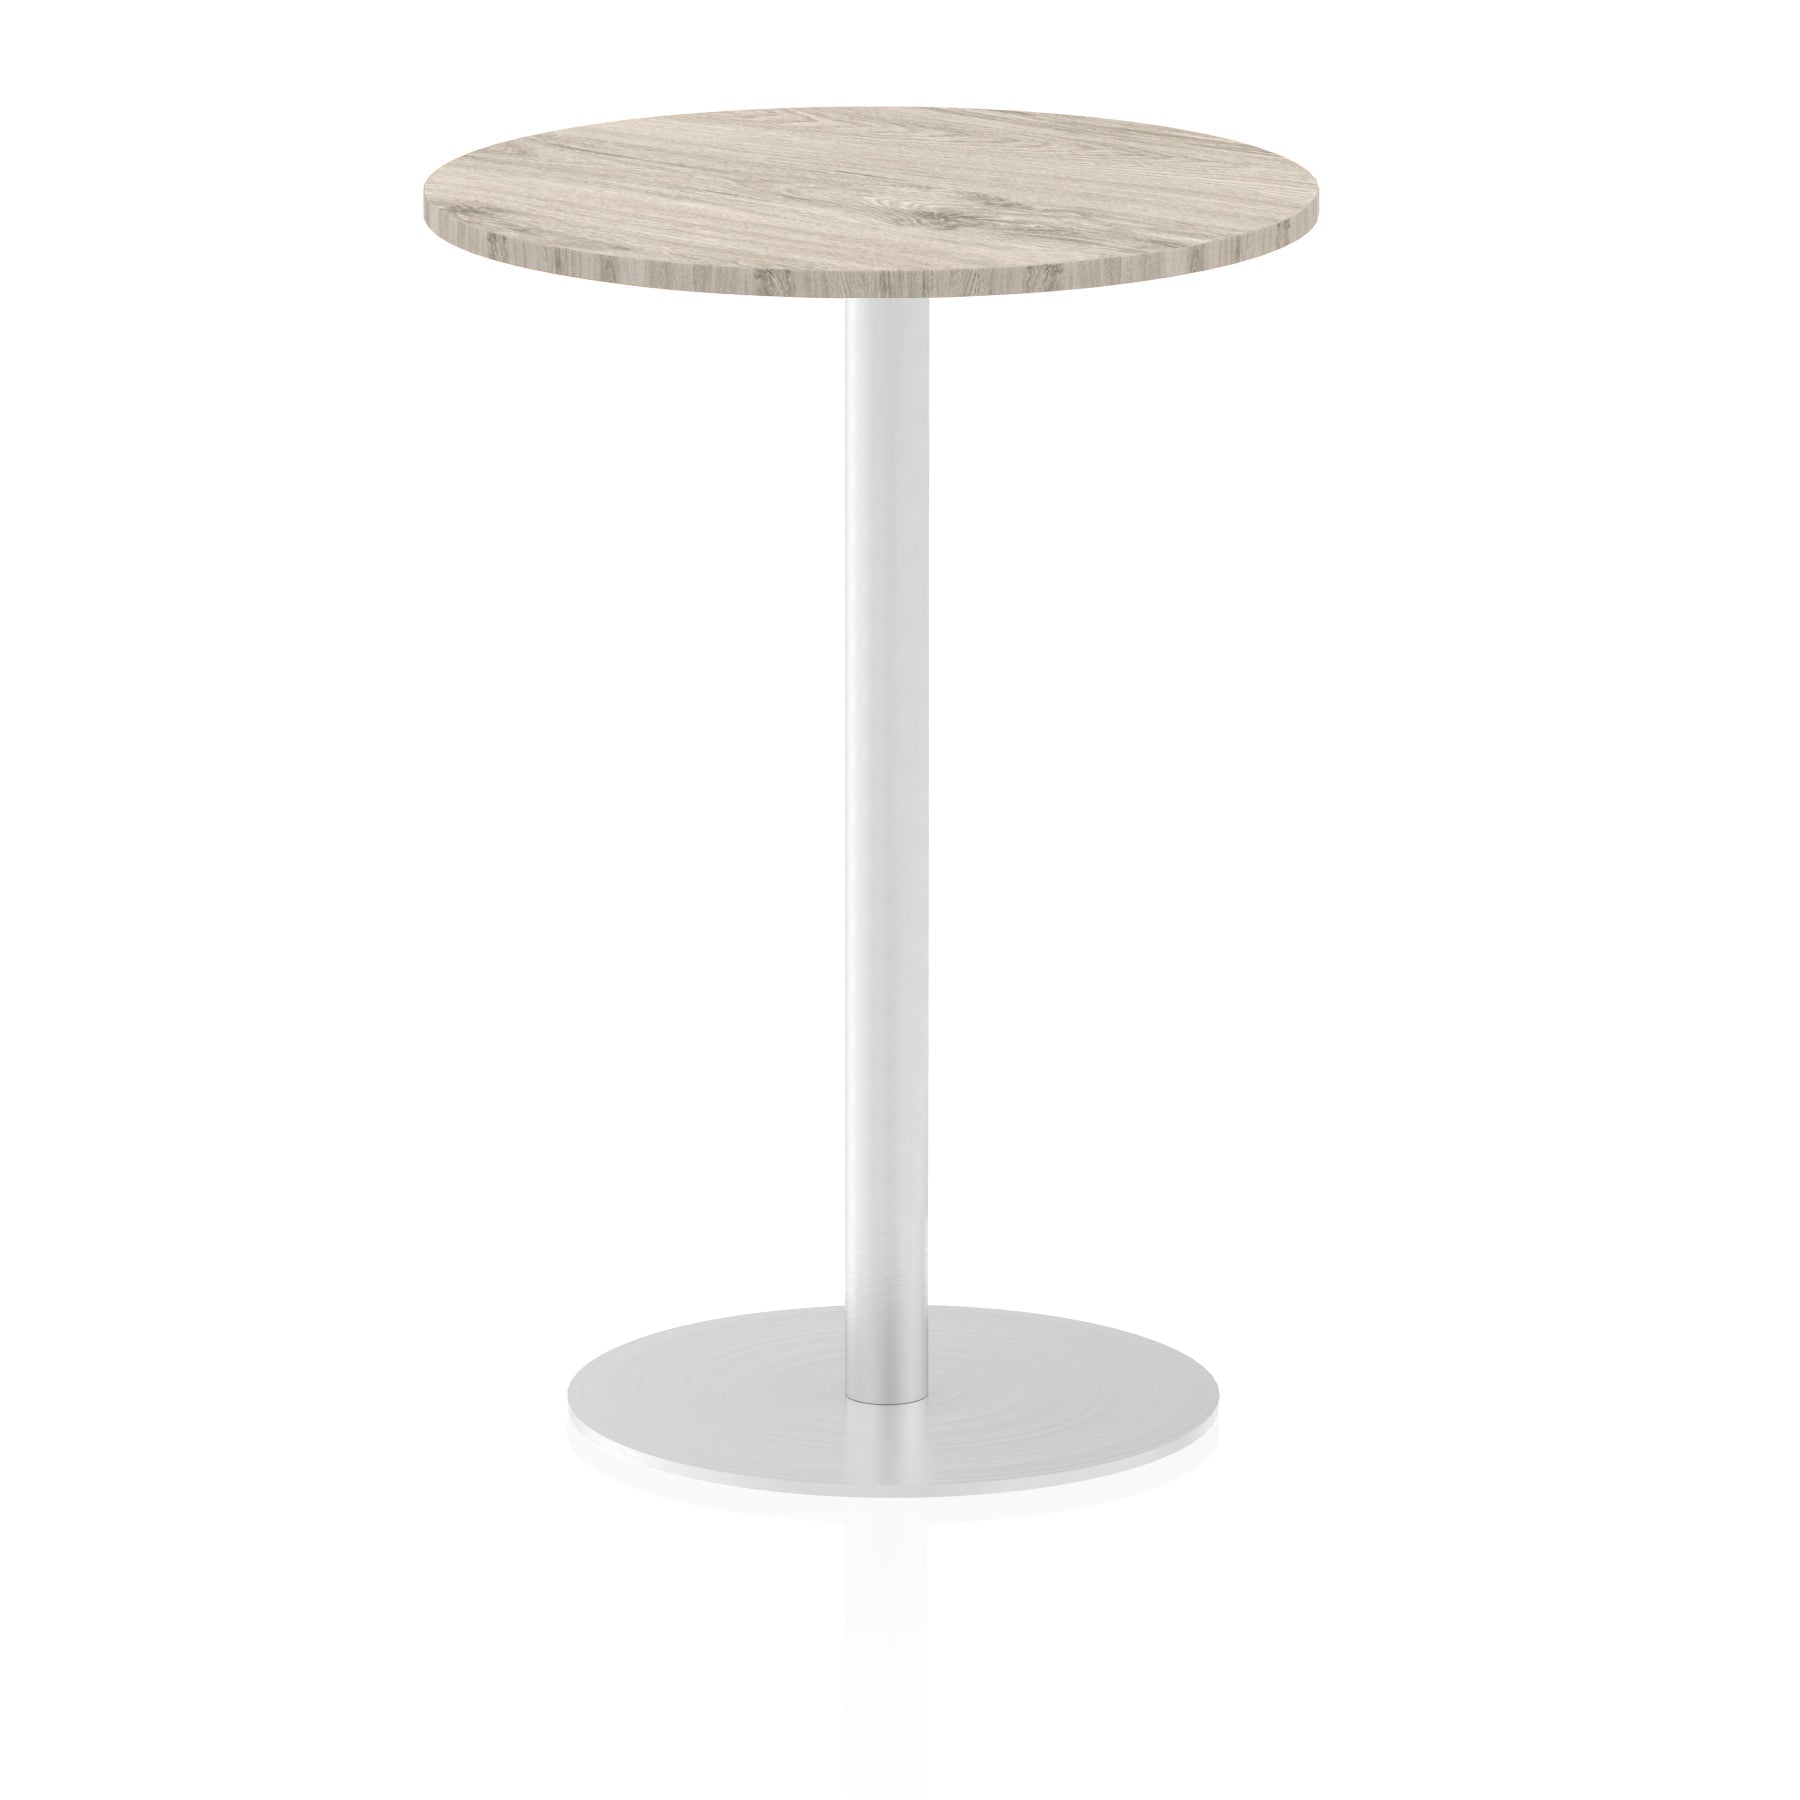 Italia Round Poseur Table - MFC Material, Self-Assembly, Bistro Leg, Silver Frame, 5-Year Guarantee - 600x600, 800x800, 1000x1000, 1200x1200